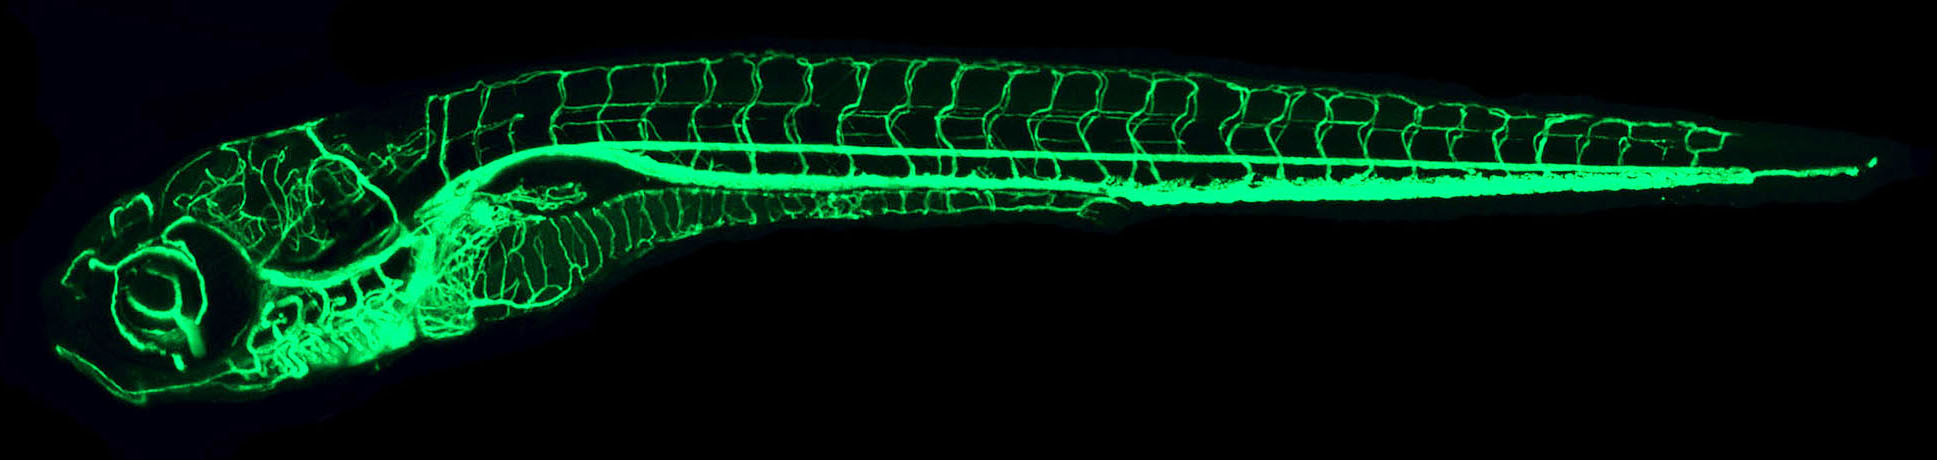 The confocal microangiography of a zebrafish larva.